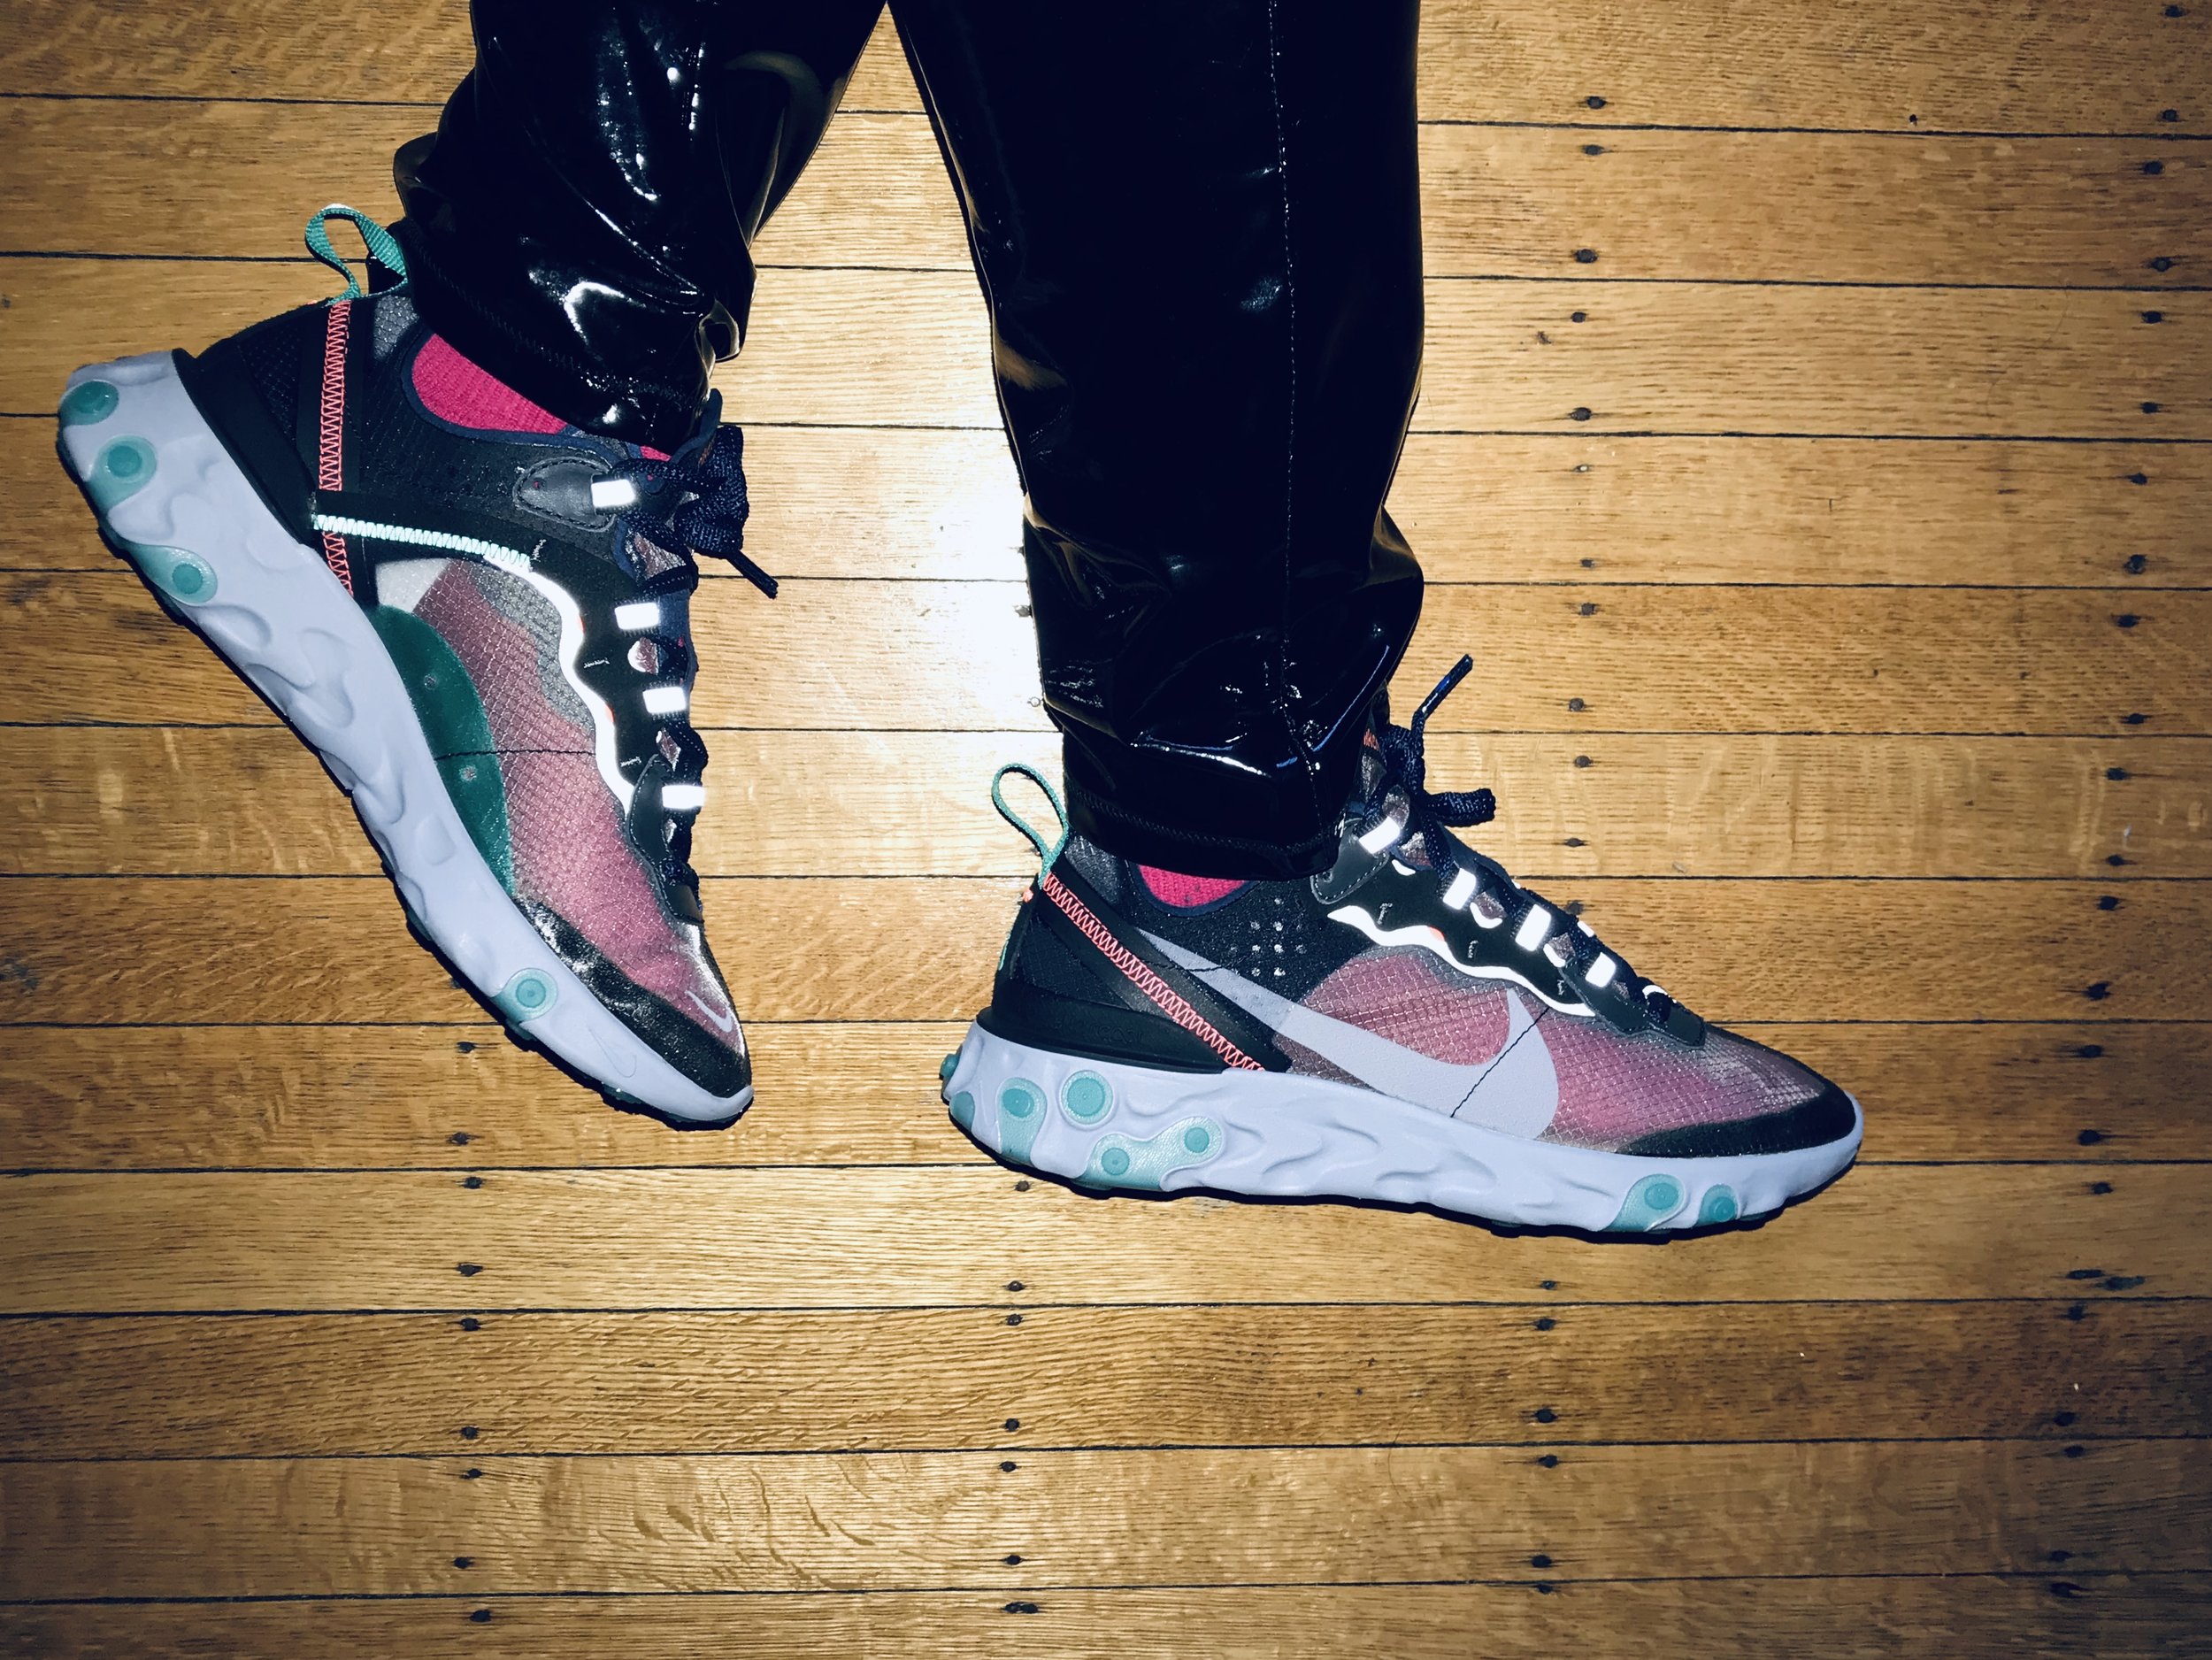 Socks With The Nike React Element 87 